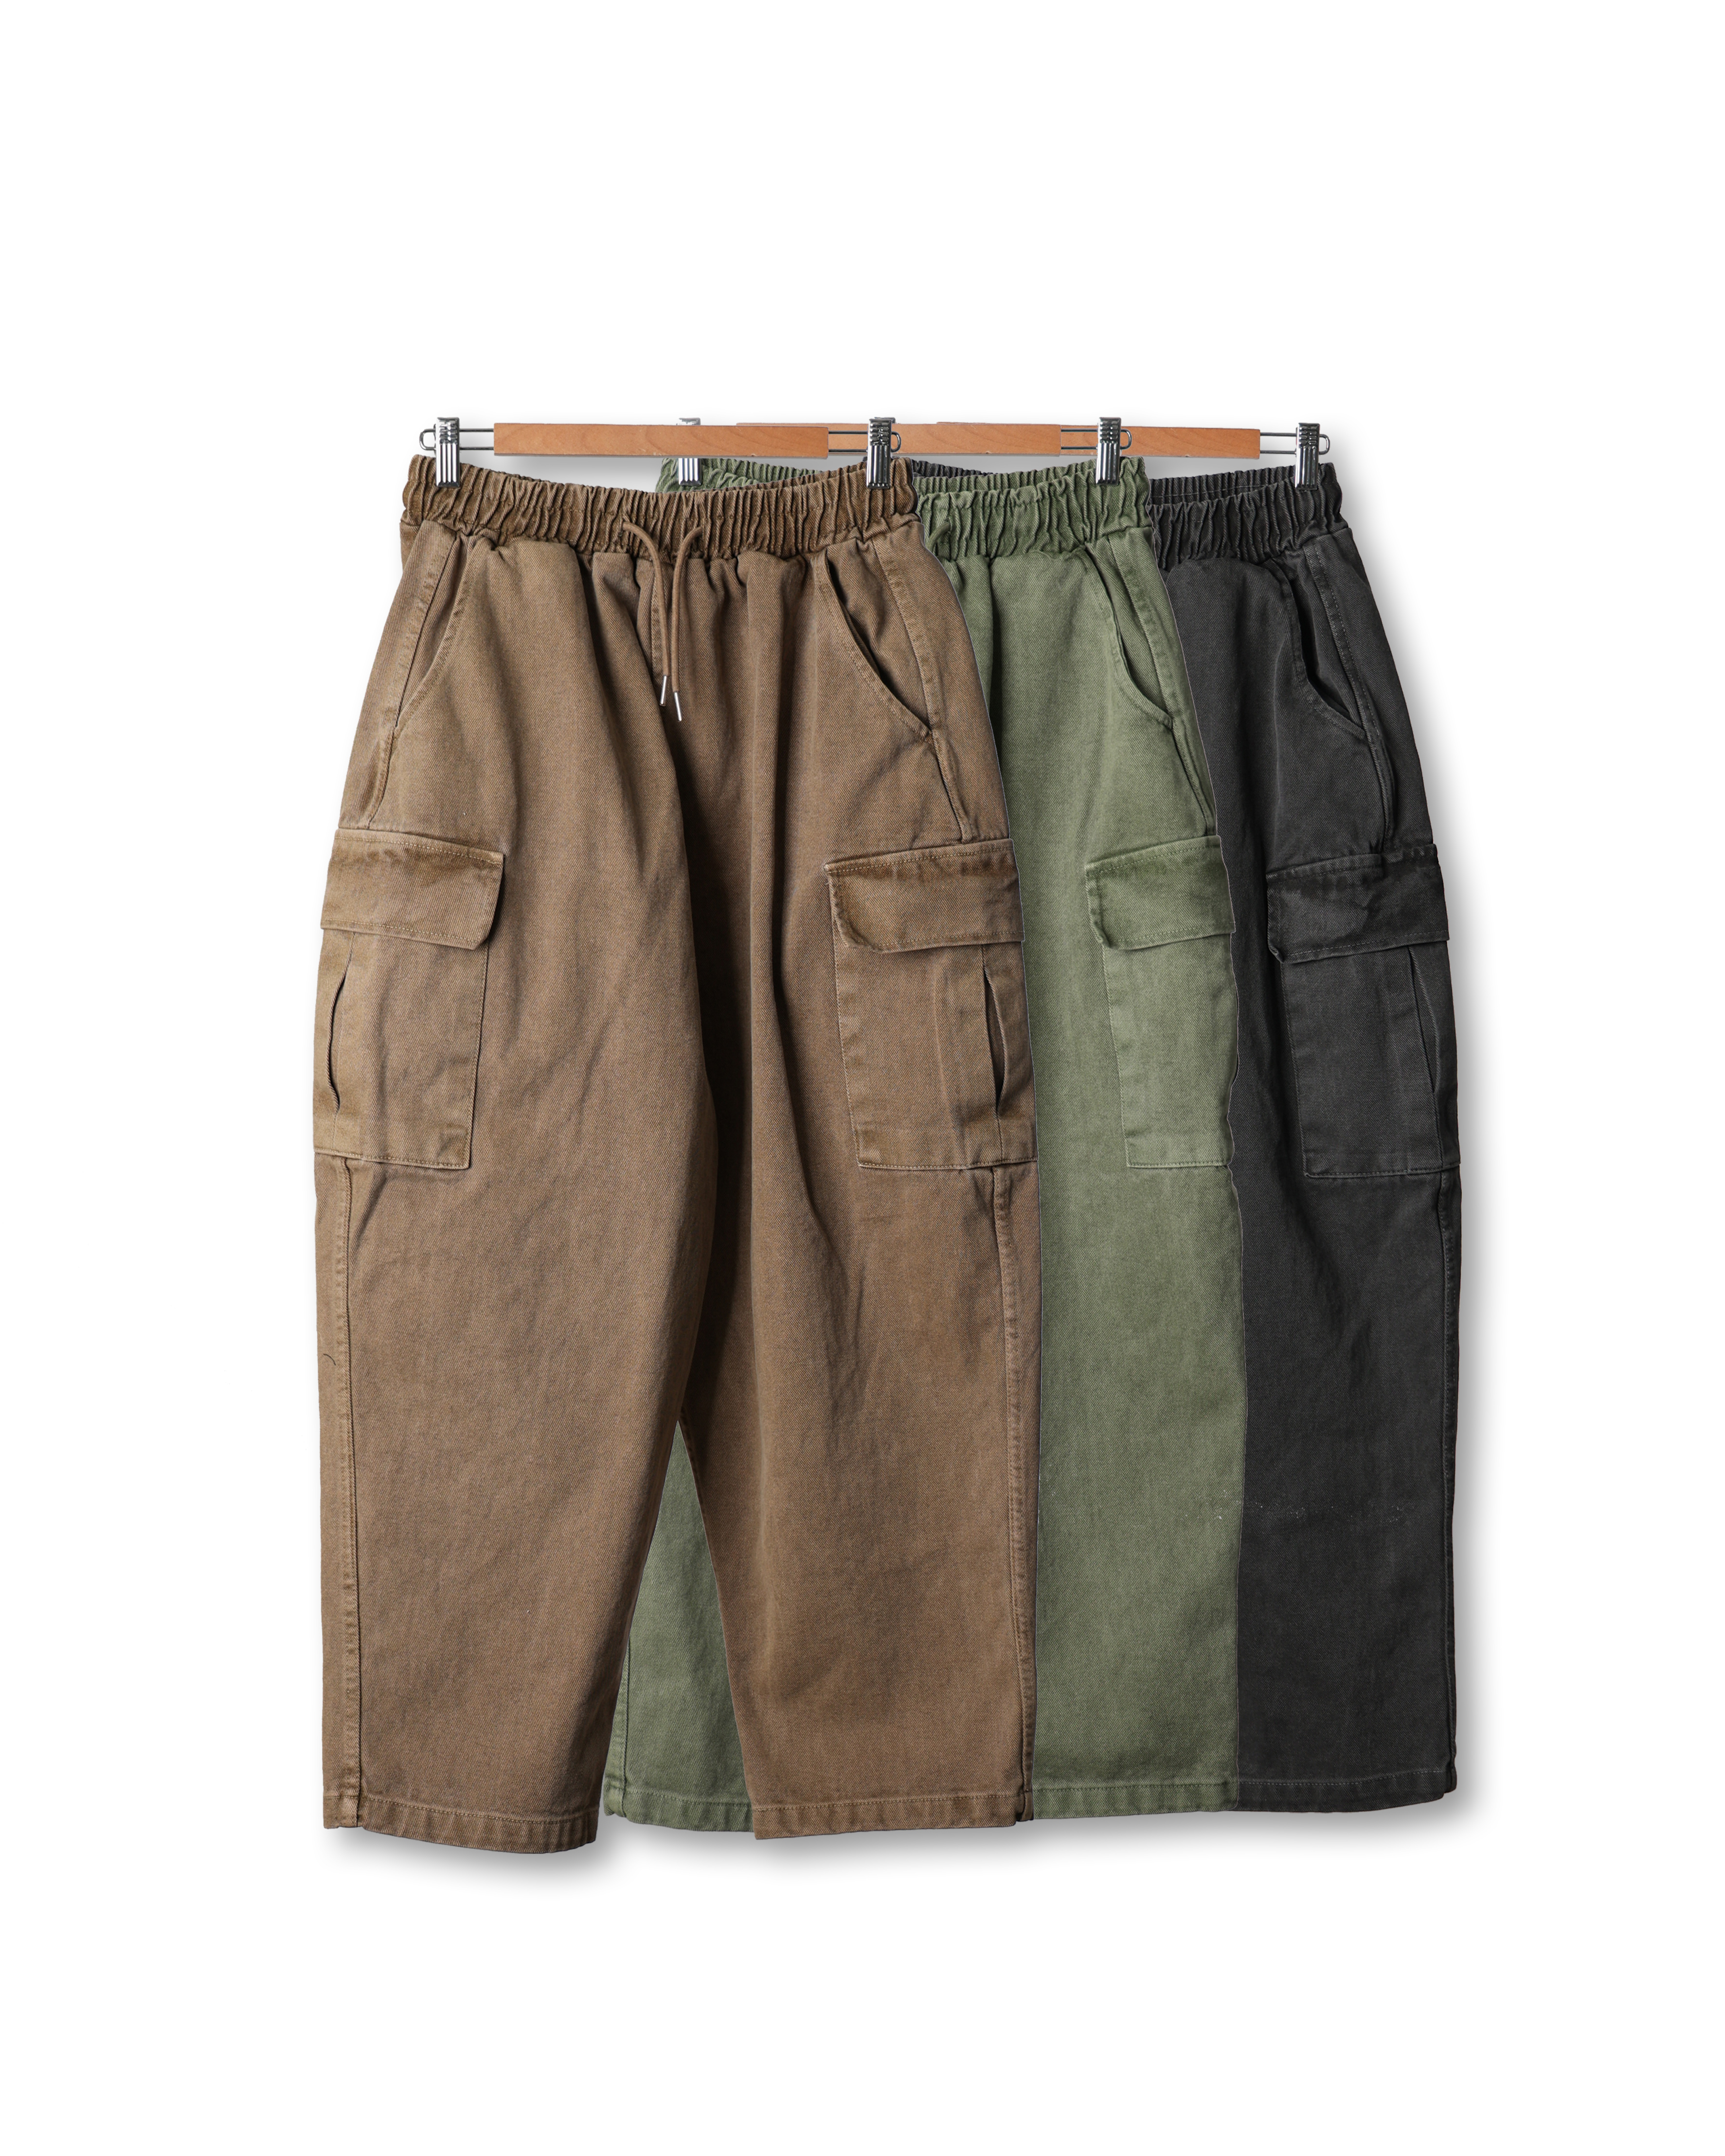 PCNT Dayed Pig Cargo Balloon Pants (Charcoal/Brown/Olive) - 2차 리오더 (5/24 배송예정)